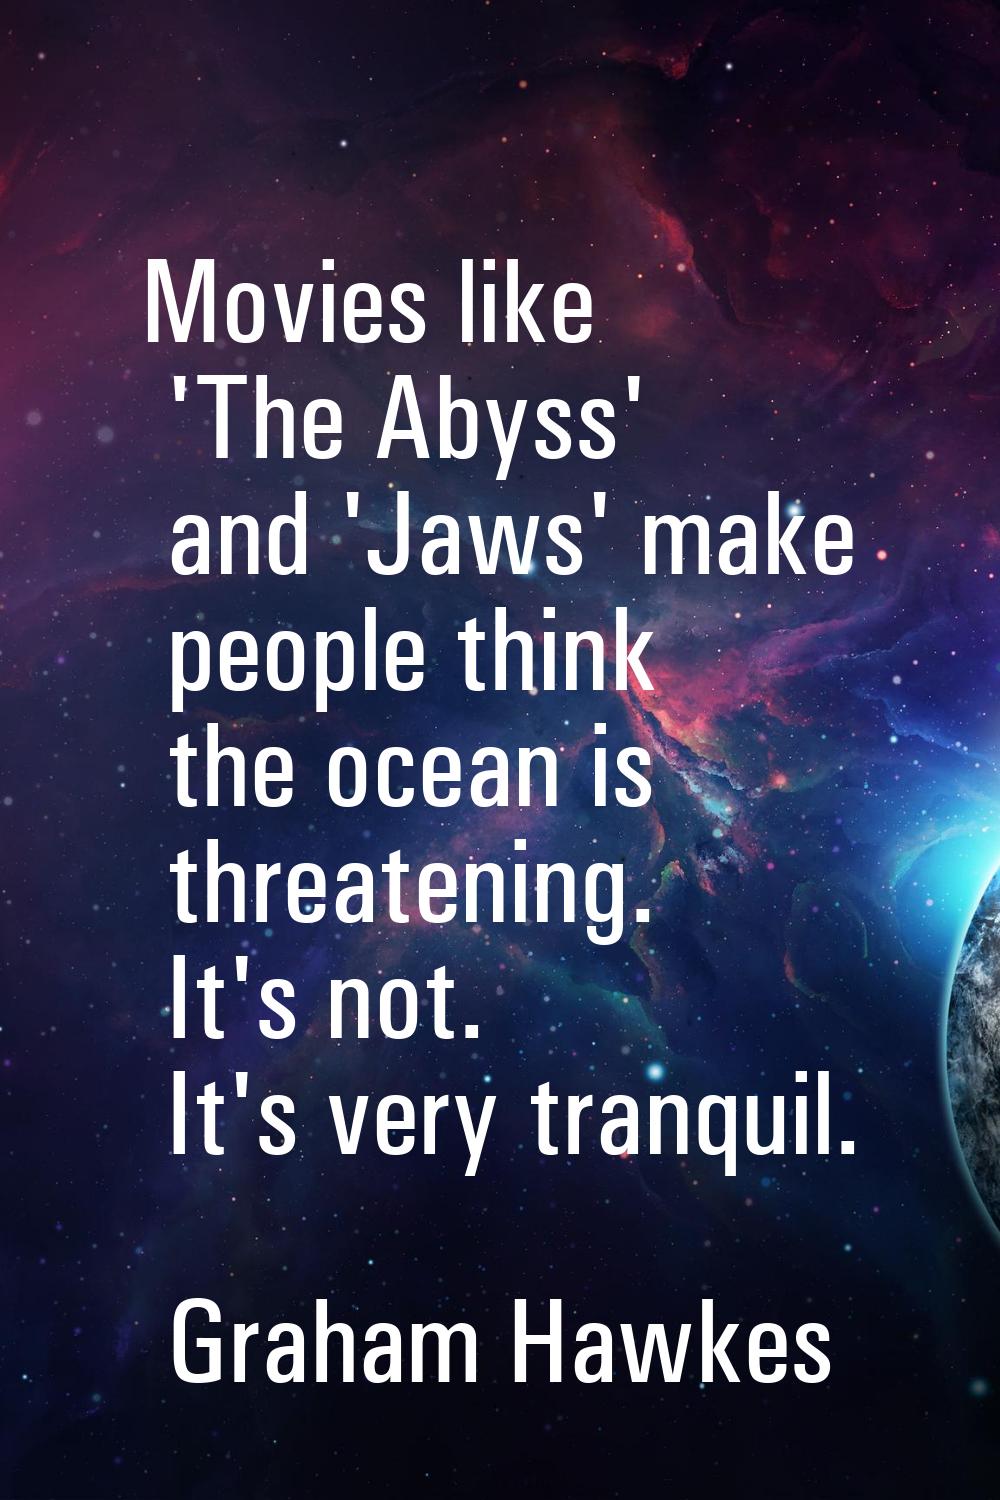 Movies like 'The Abyss' and 'Jaws' make people think the ocean is threatening. It's not. It's very 